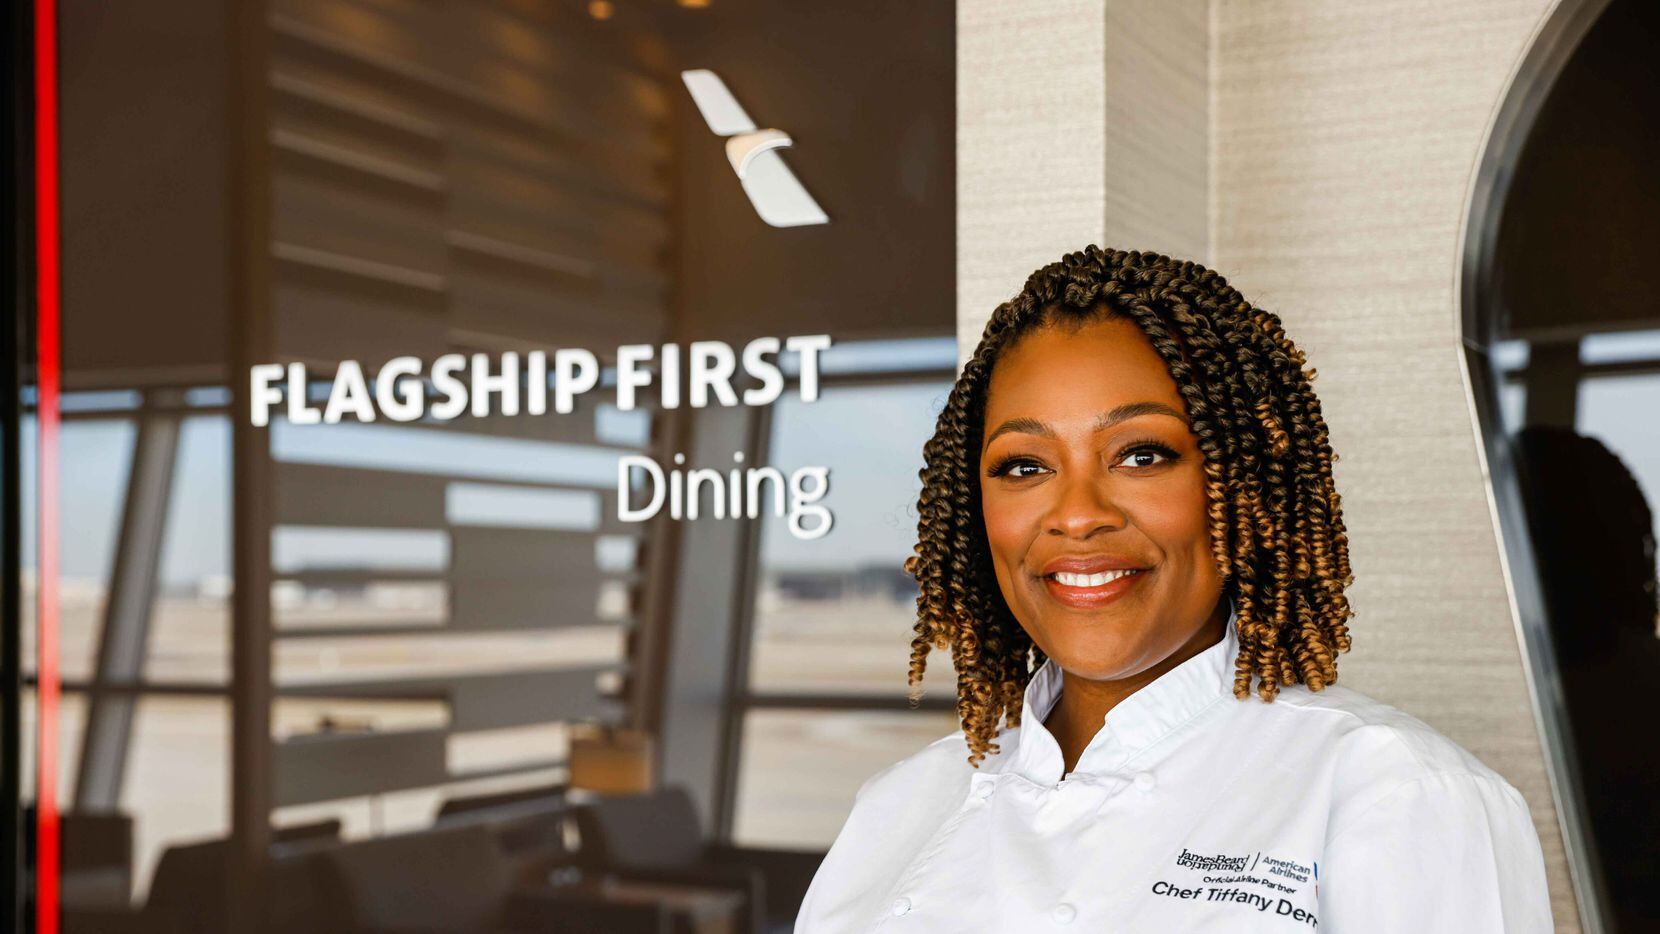 Chef Tiffany Derry at the Flagship First Dining restaurant at American Airlines' Flagship...